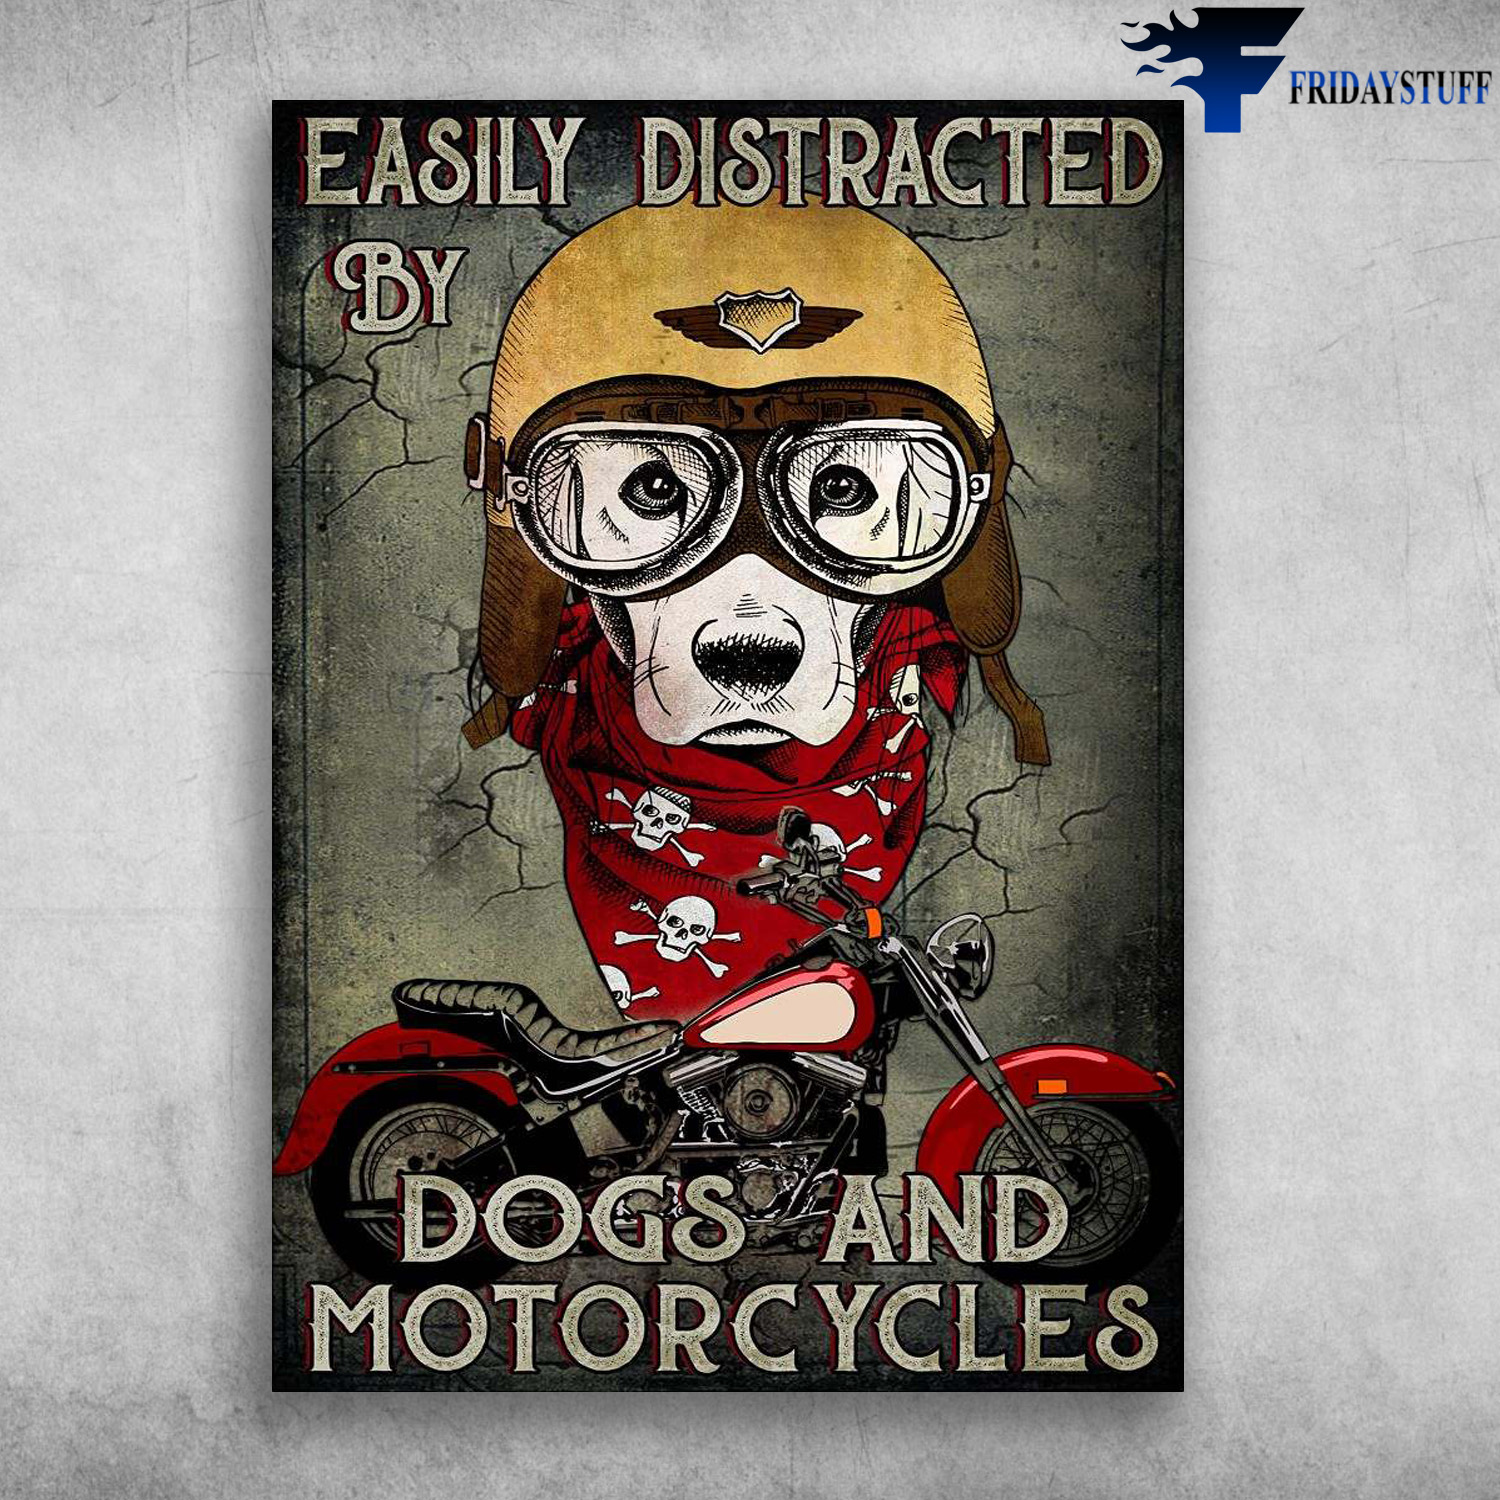 Motorcycle Dog - Easily Distracted By, Dogs And Motorcycles